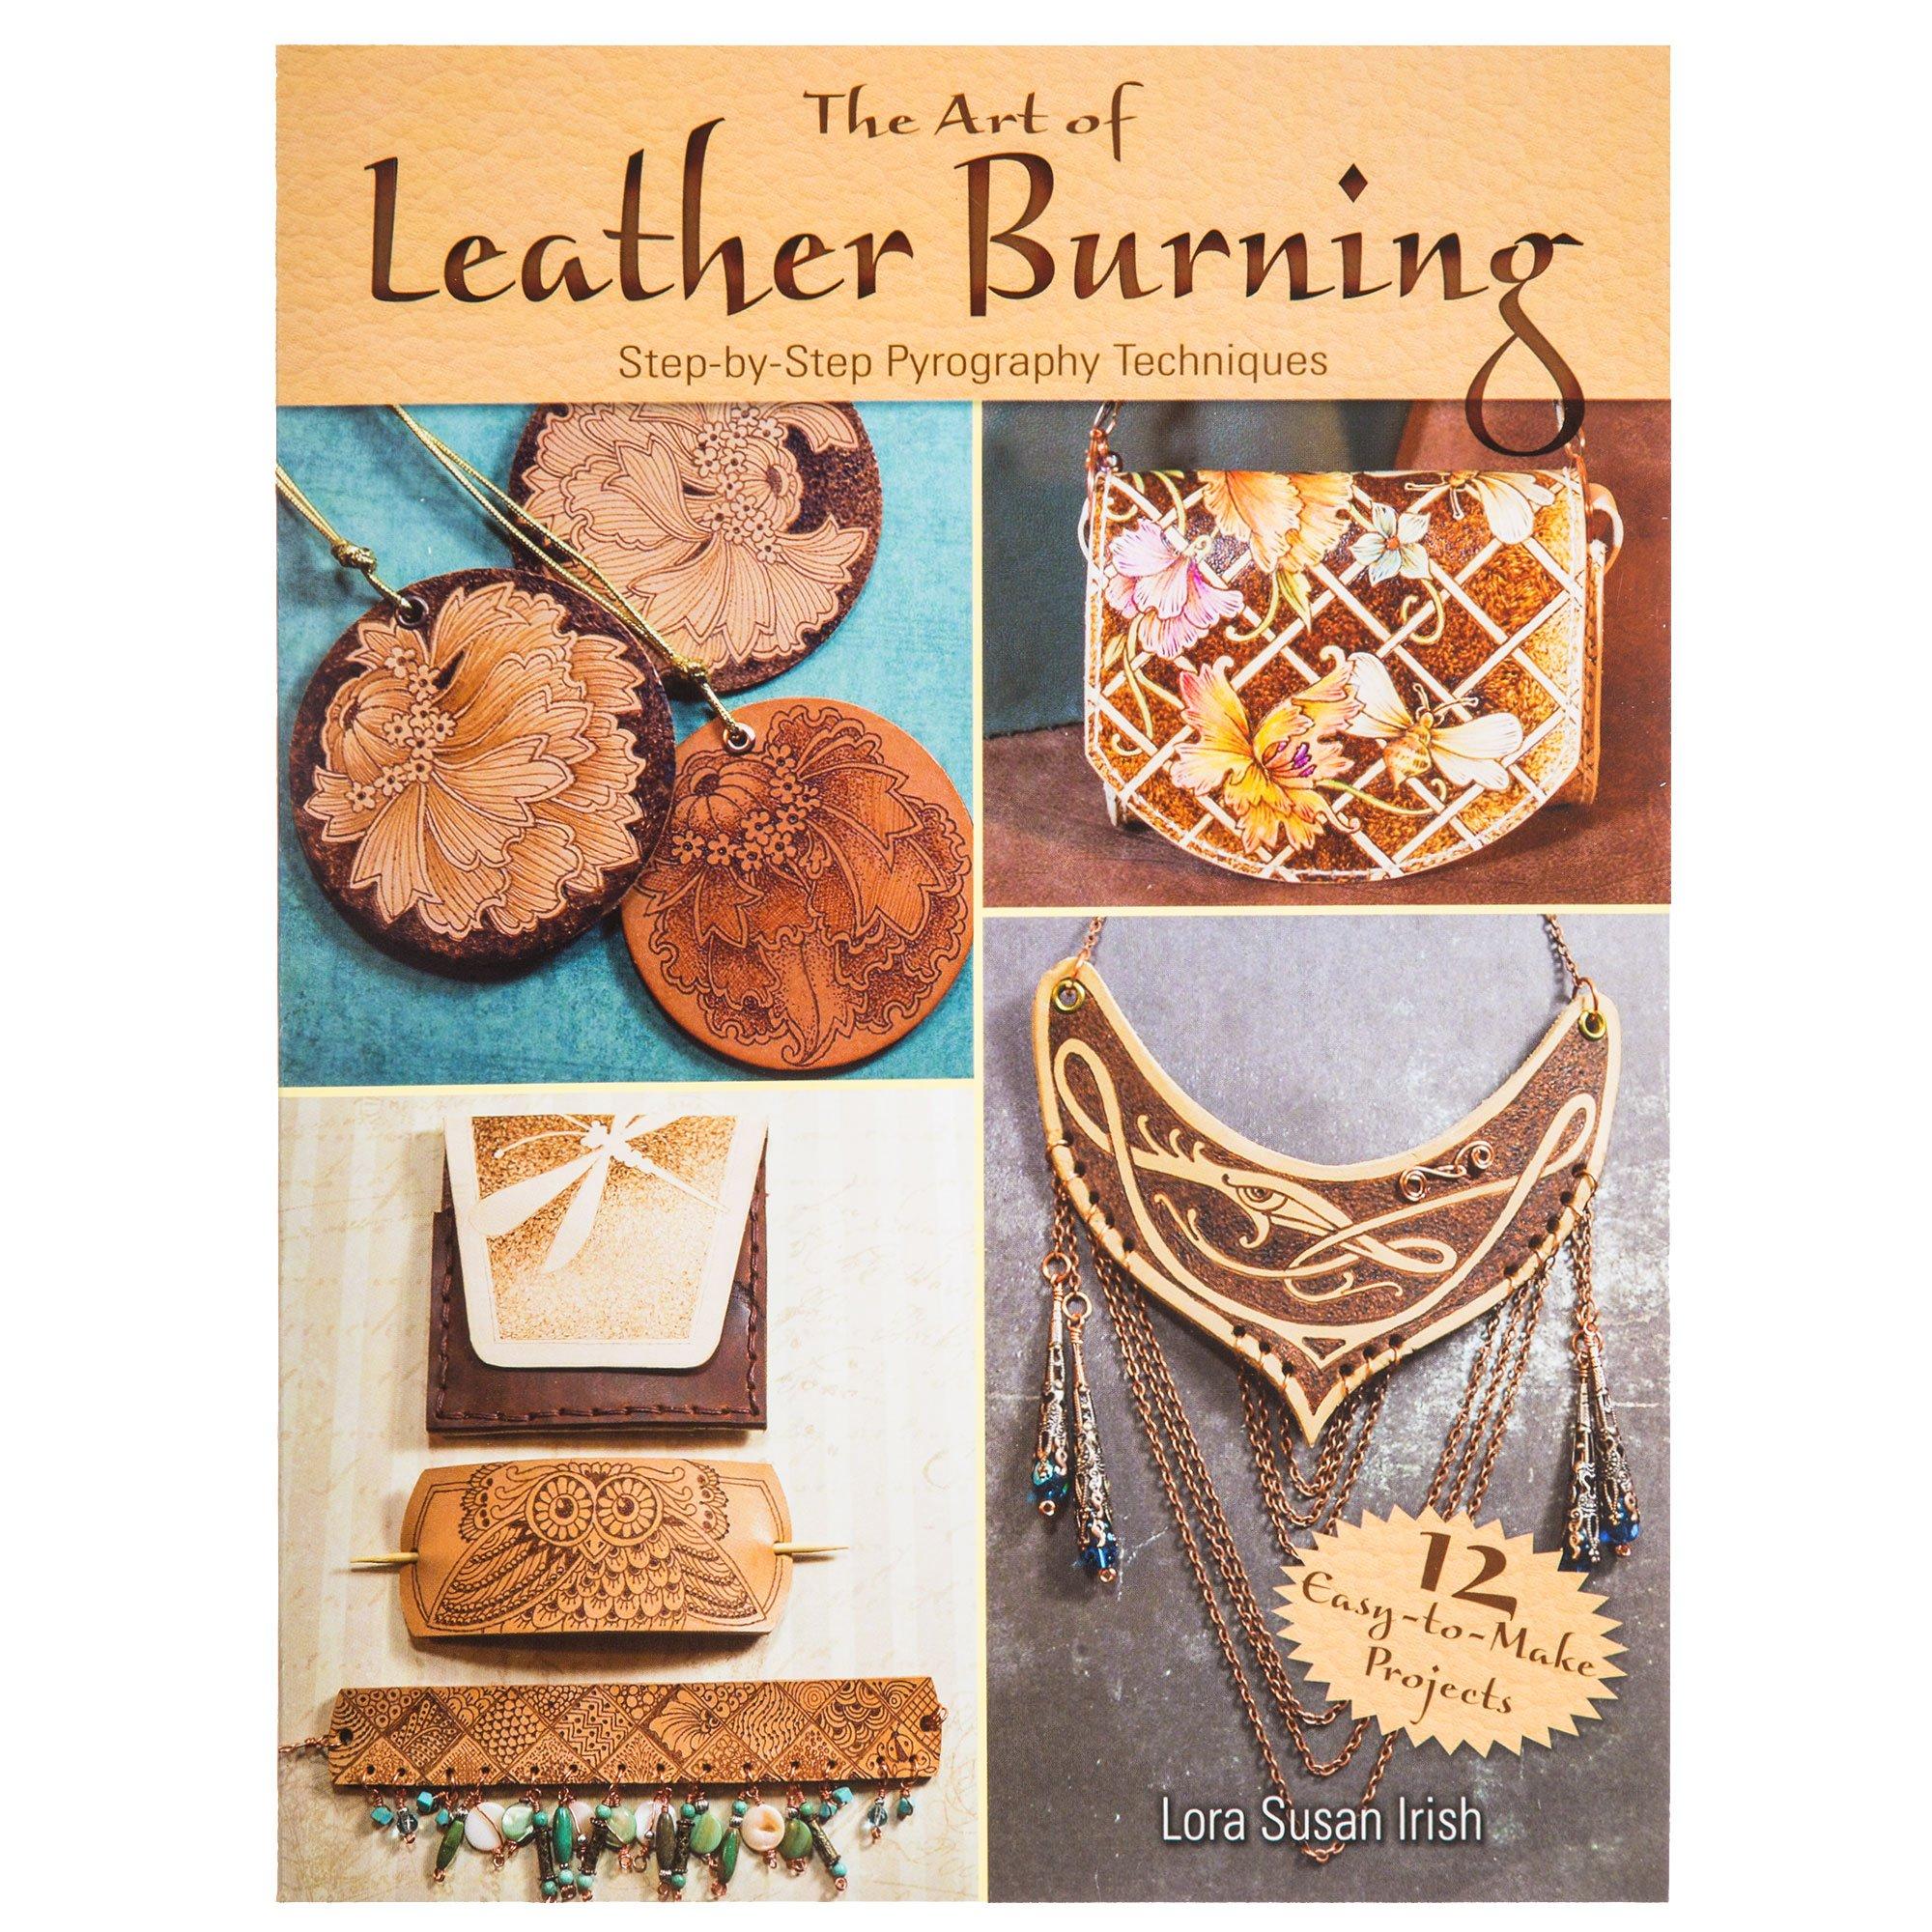 CRAFT Leather Burning Kit  Available At Bunnings 